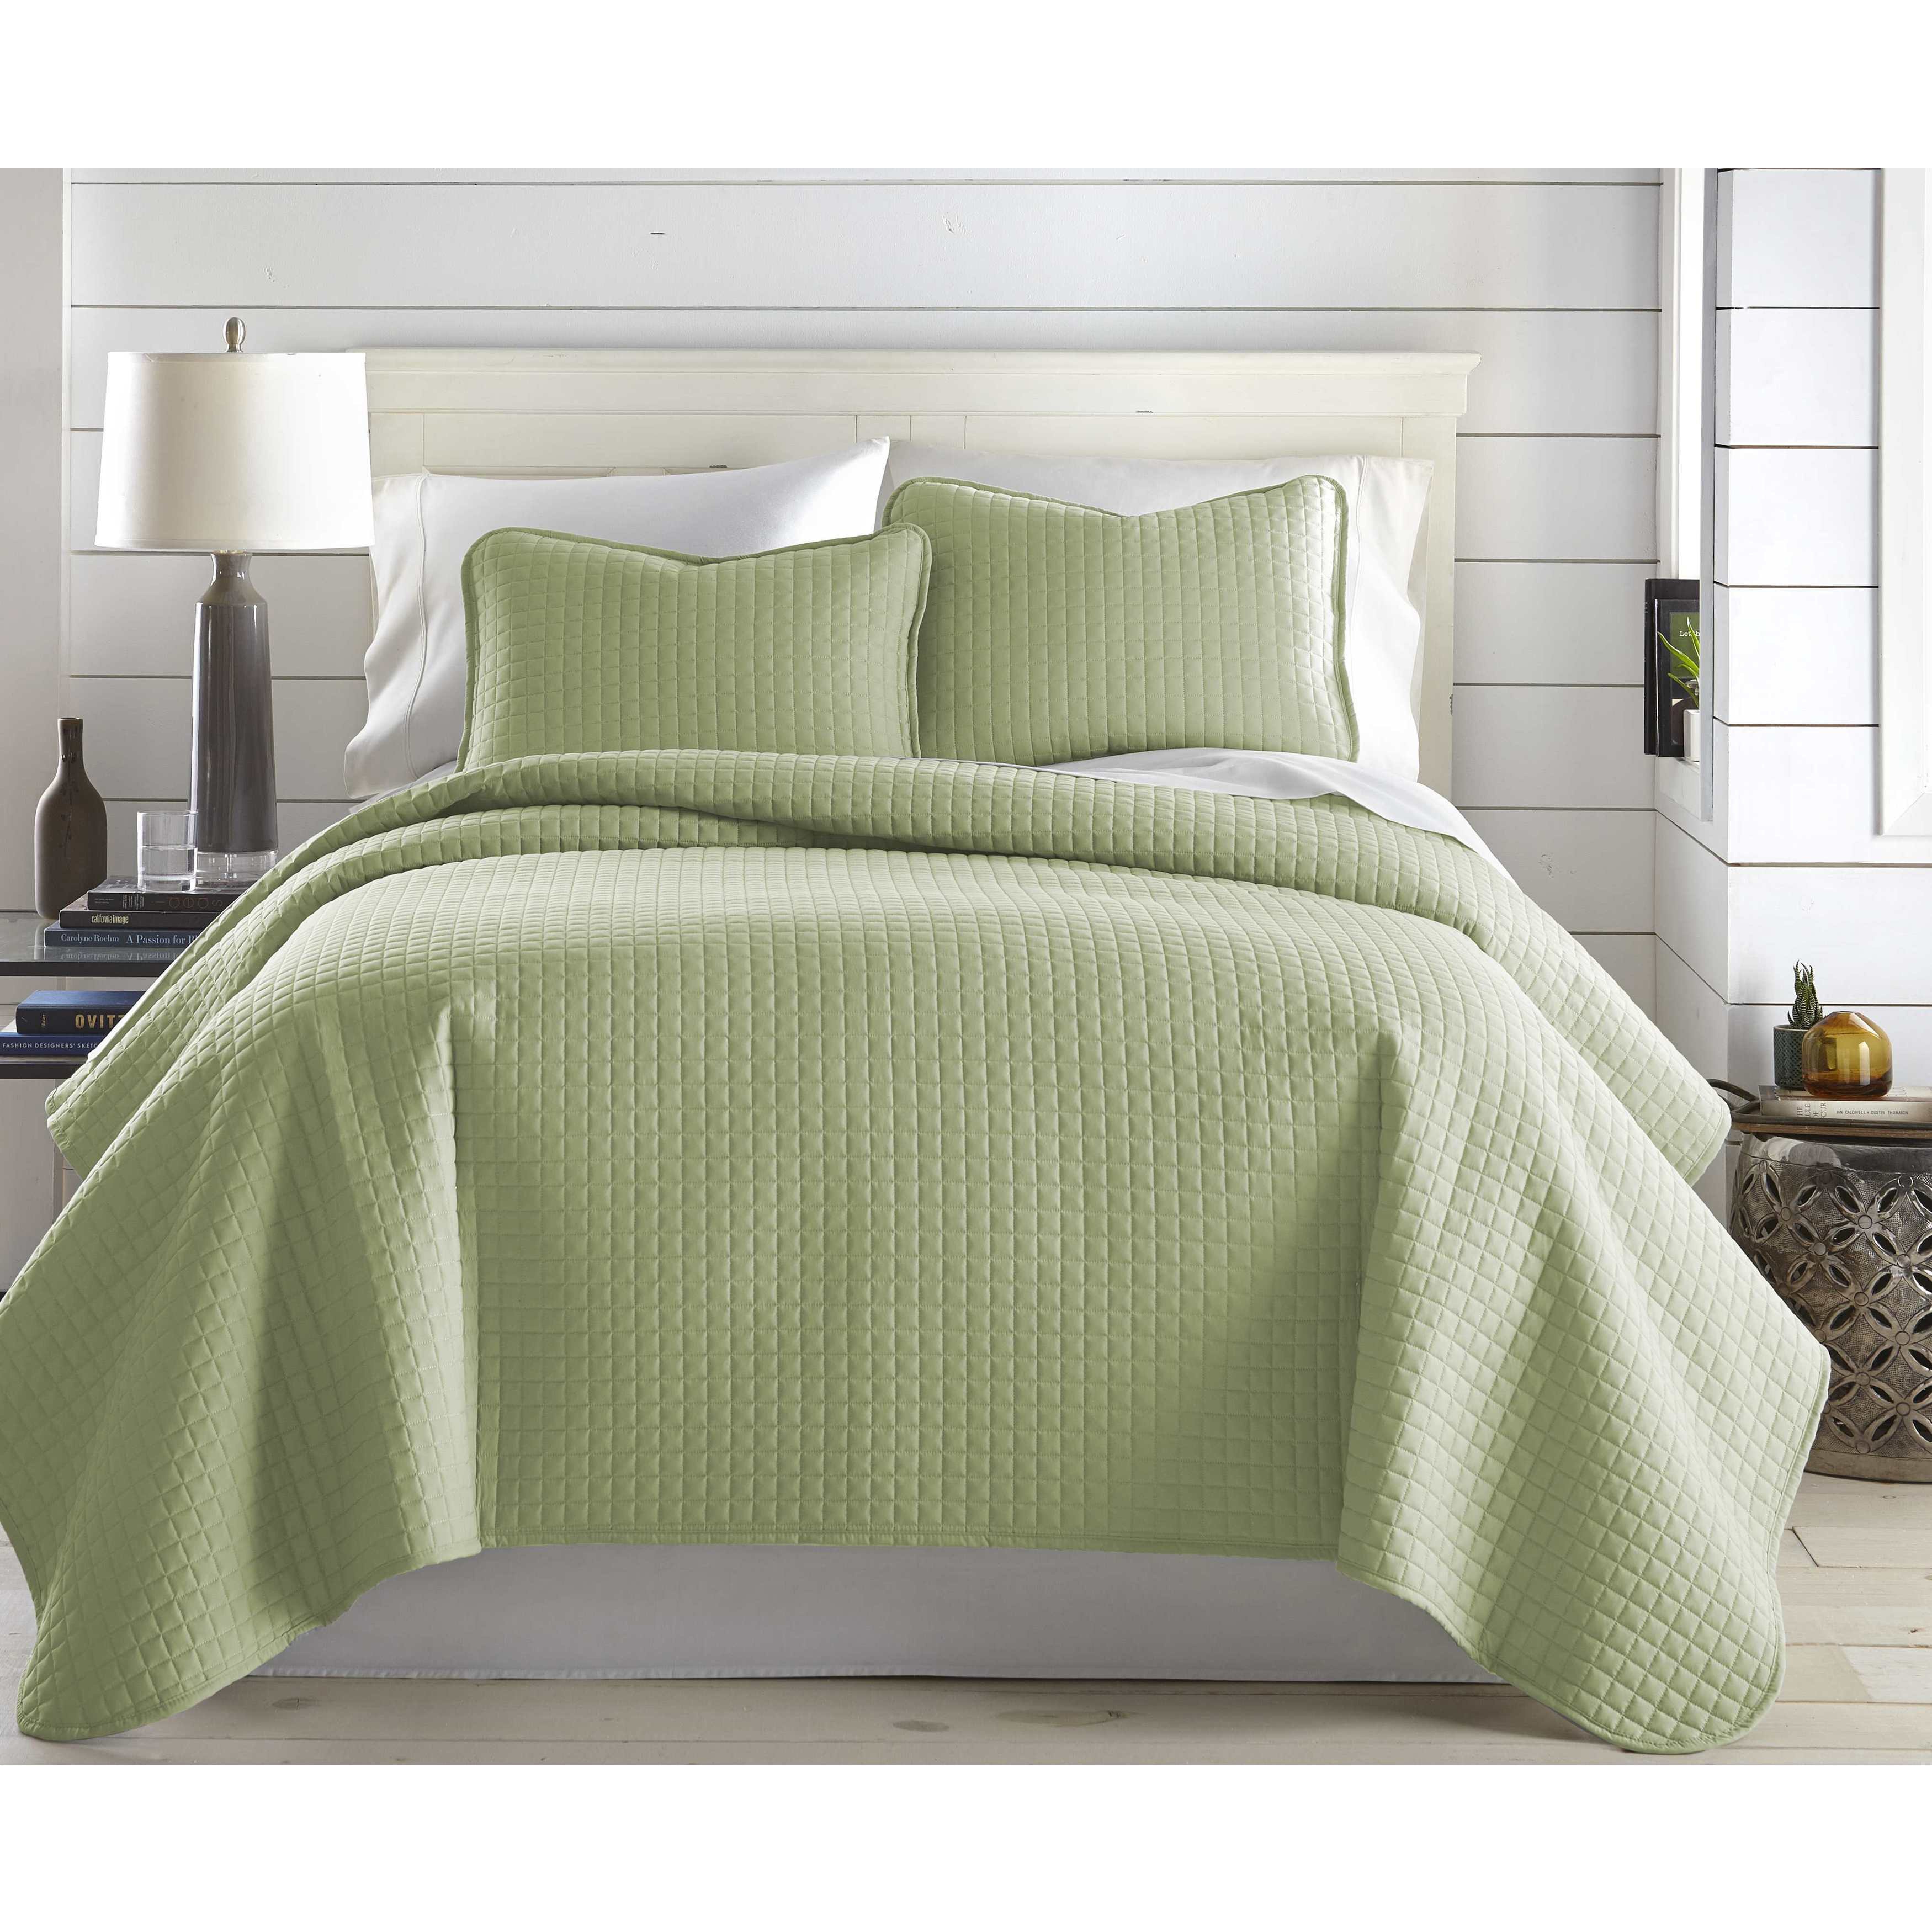 Bedding Quilts Bedspreads Coverlets Full Queen Cal King Bed